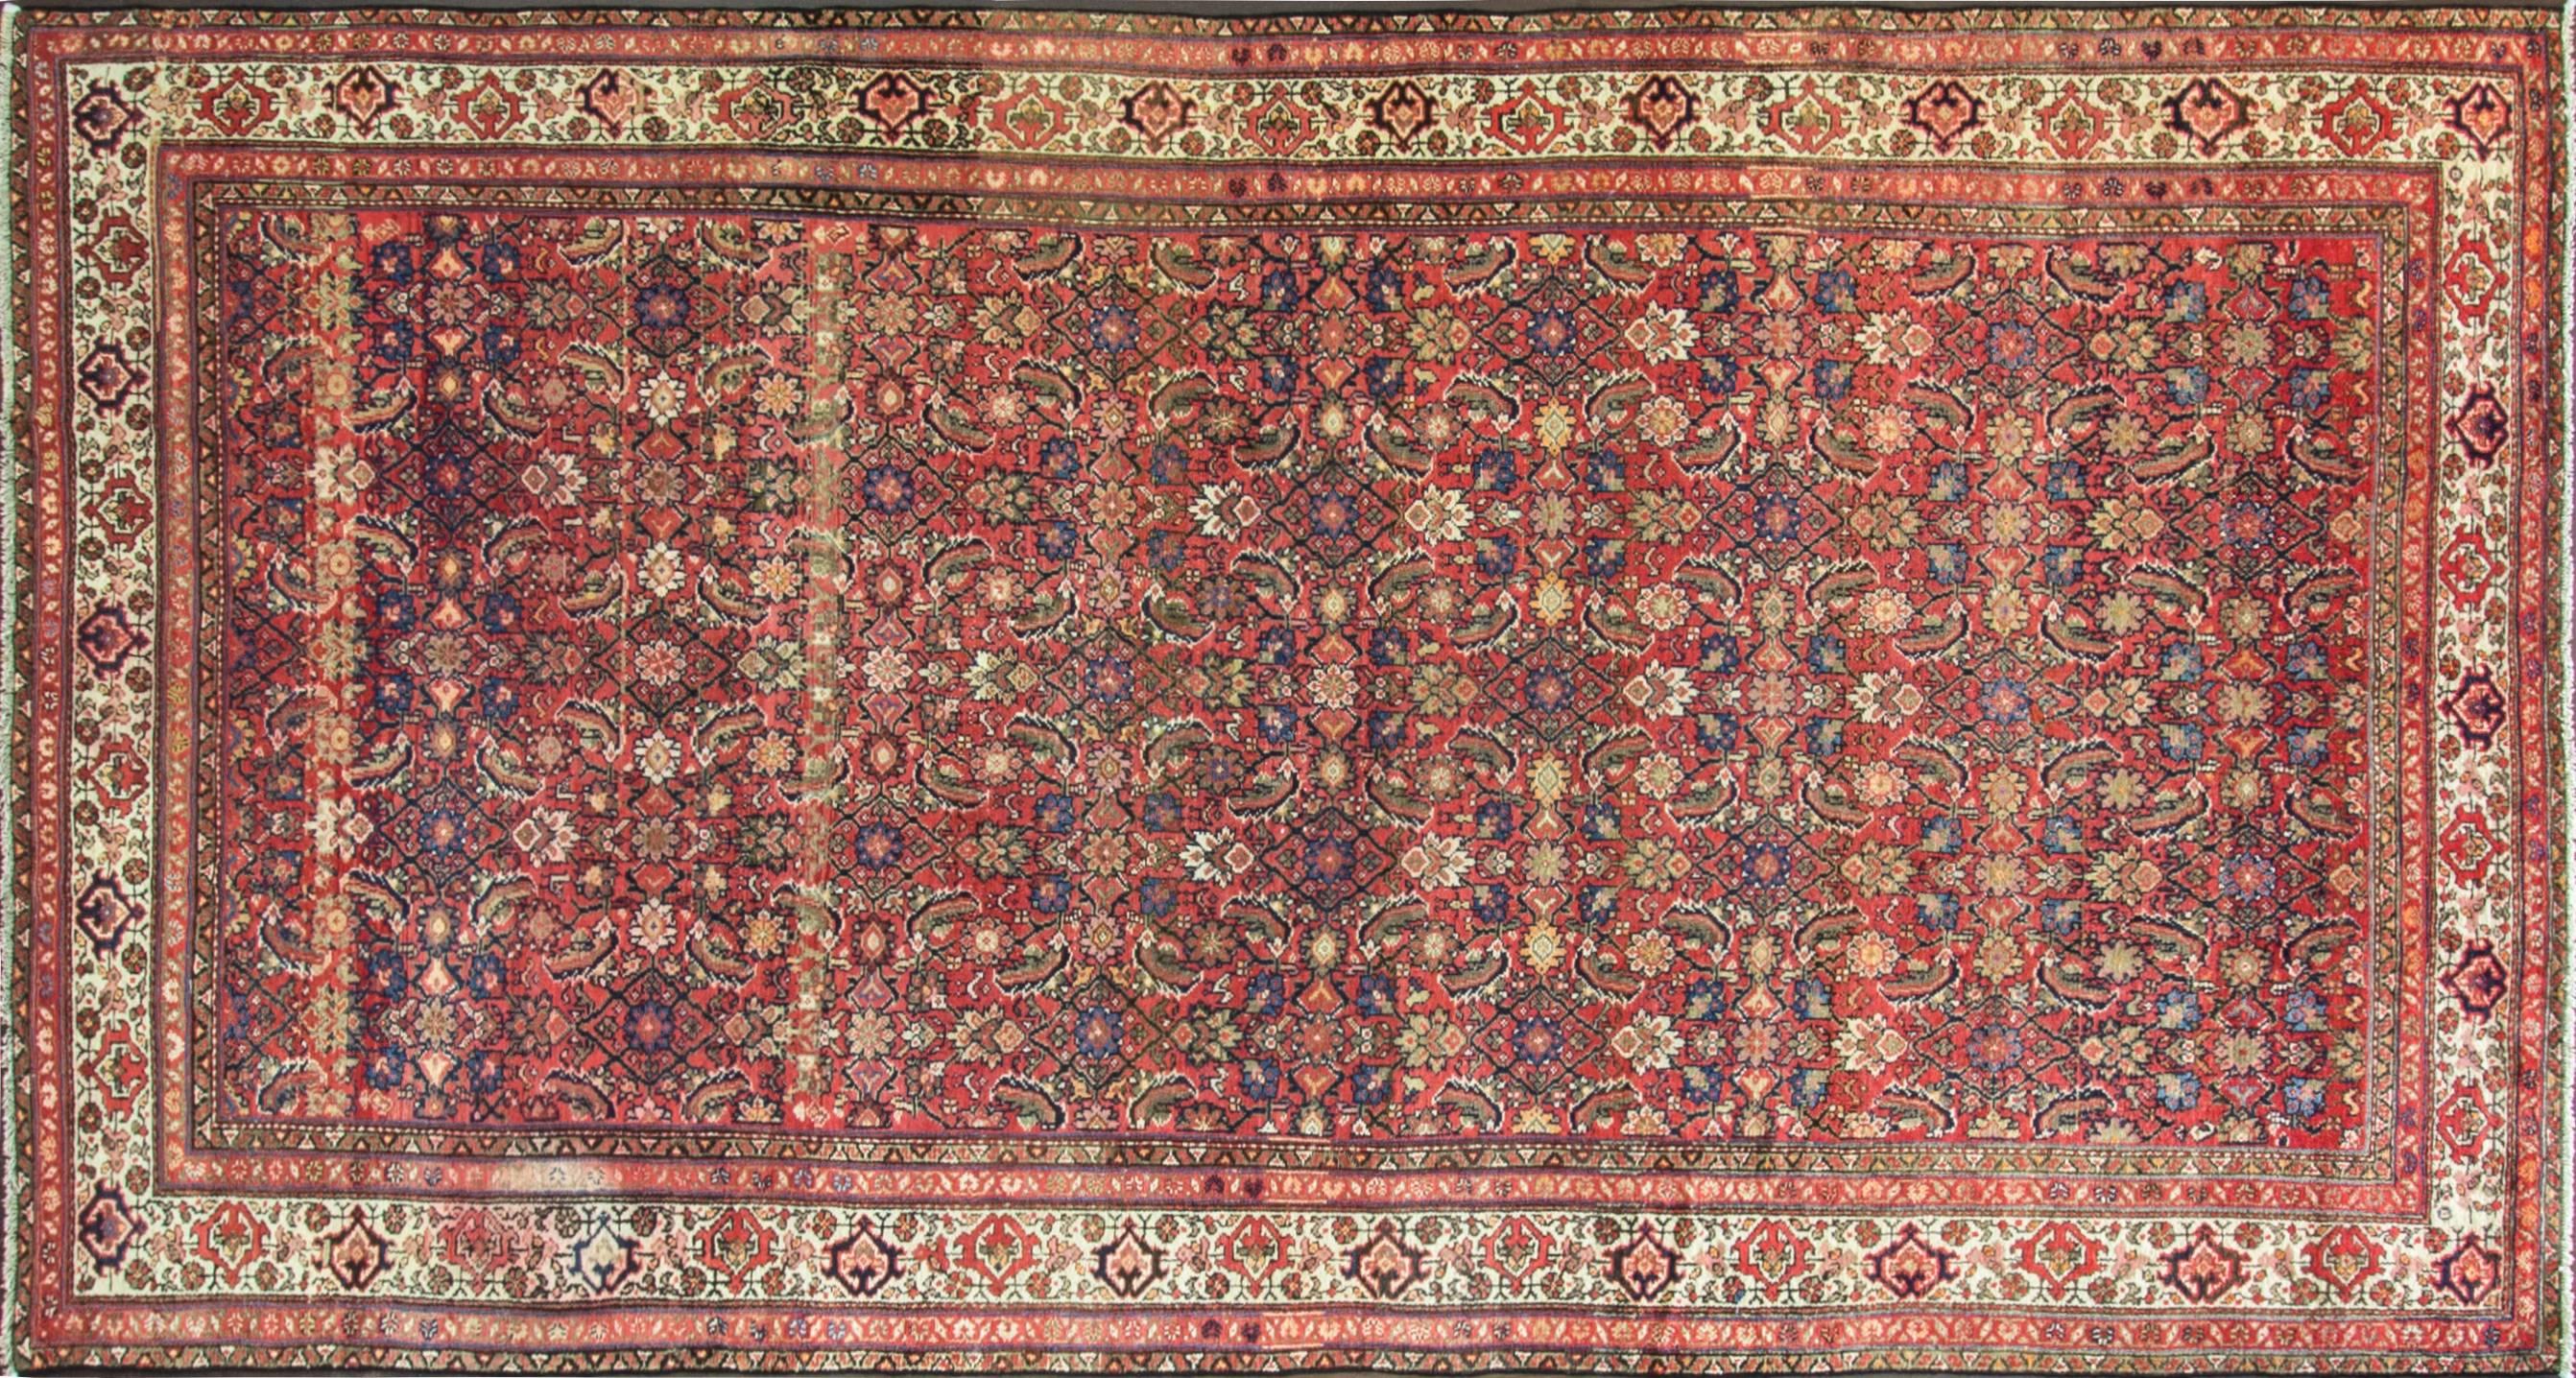 A very busy Herati center and a pleasant border design with running water and trees. The tribal weavers in Malayer were often Turkish, and they employed the Turkish knot, Gourde, to weave these creations. The Gourde is a symmetrical knot, as opposed